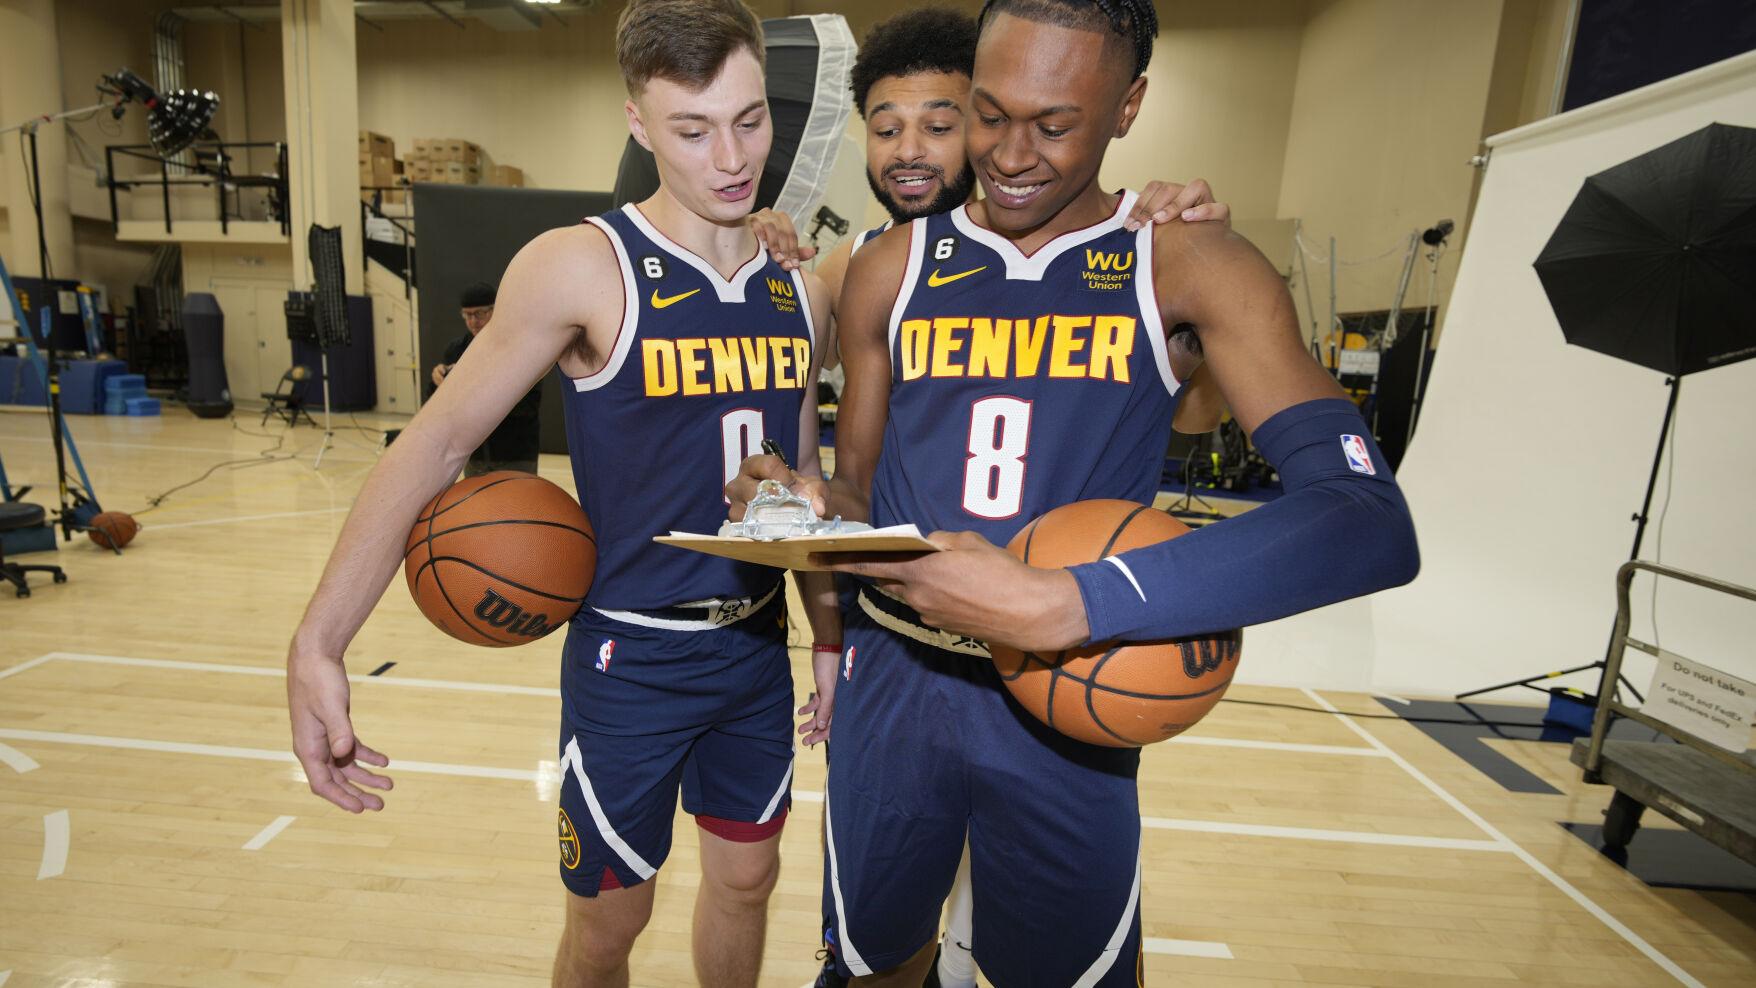 Patient approach could pay off for Nuggets rookie class led by Christian  Braun, Peyton Watson, Denver Nuggets